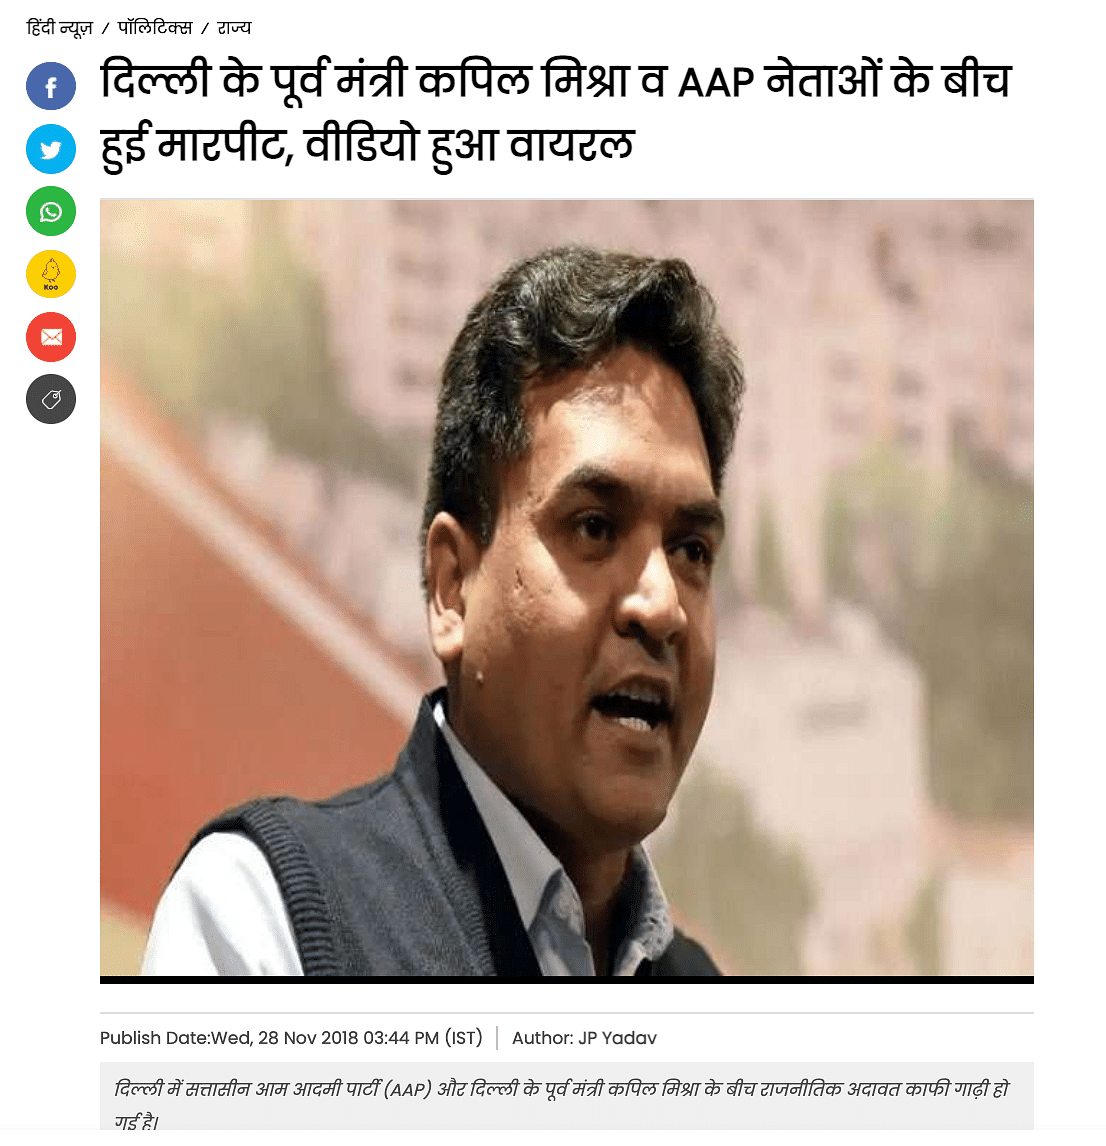 Kapil Mishra was disqualified from the AAP under the anti-defection law and had joined the BJP in August 2019.